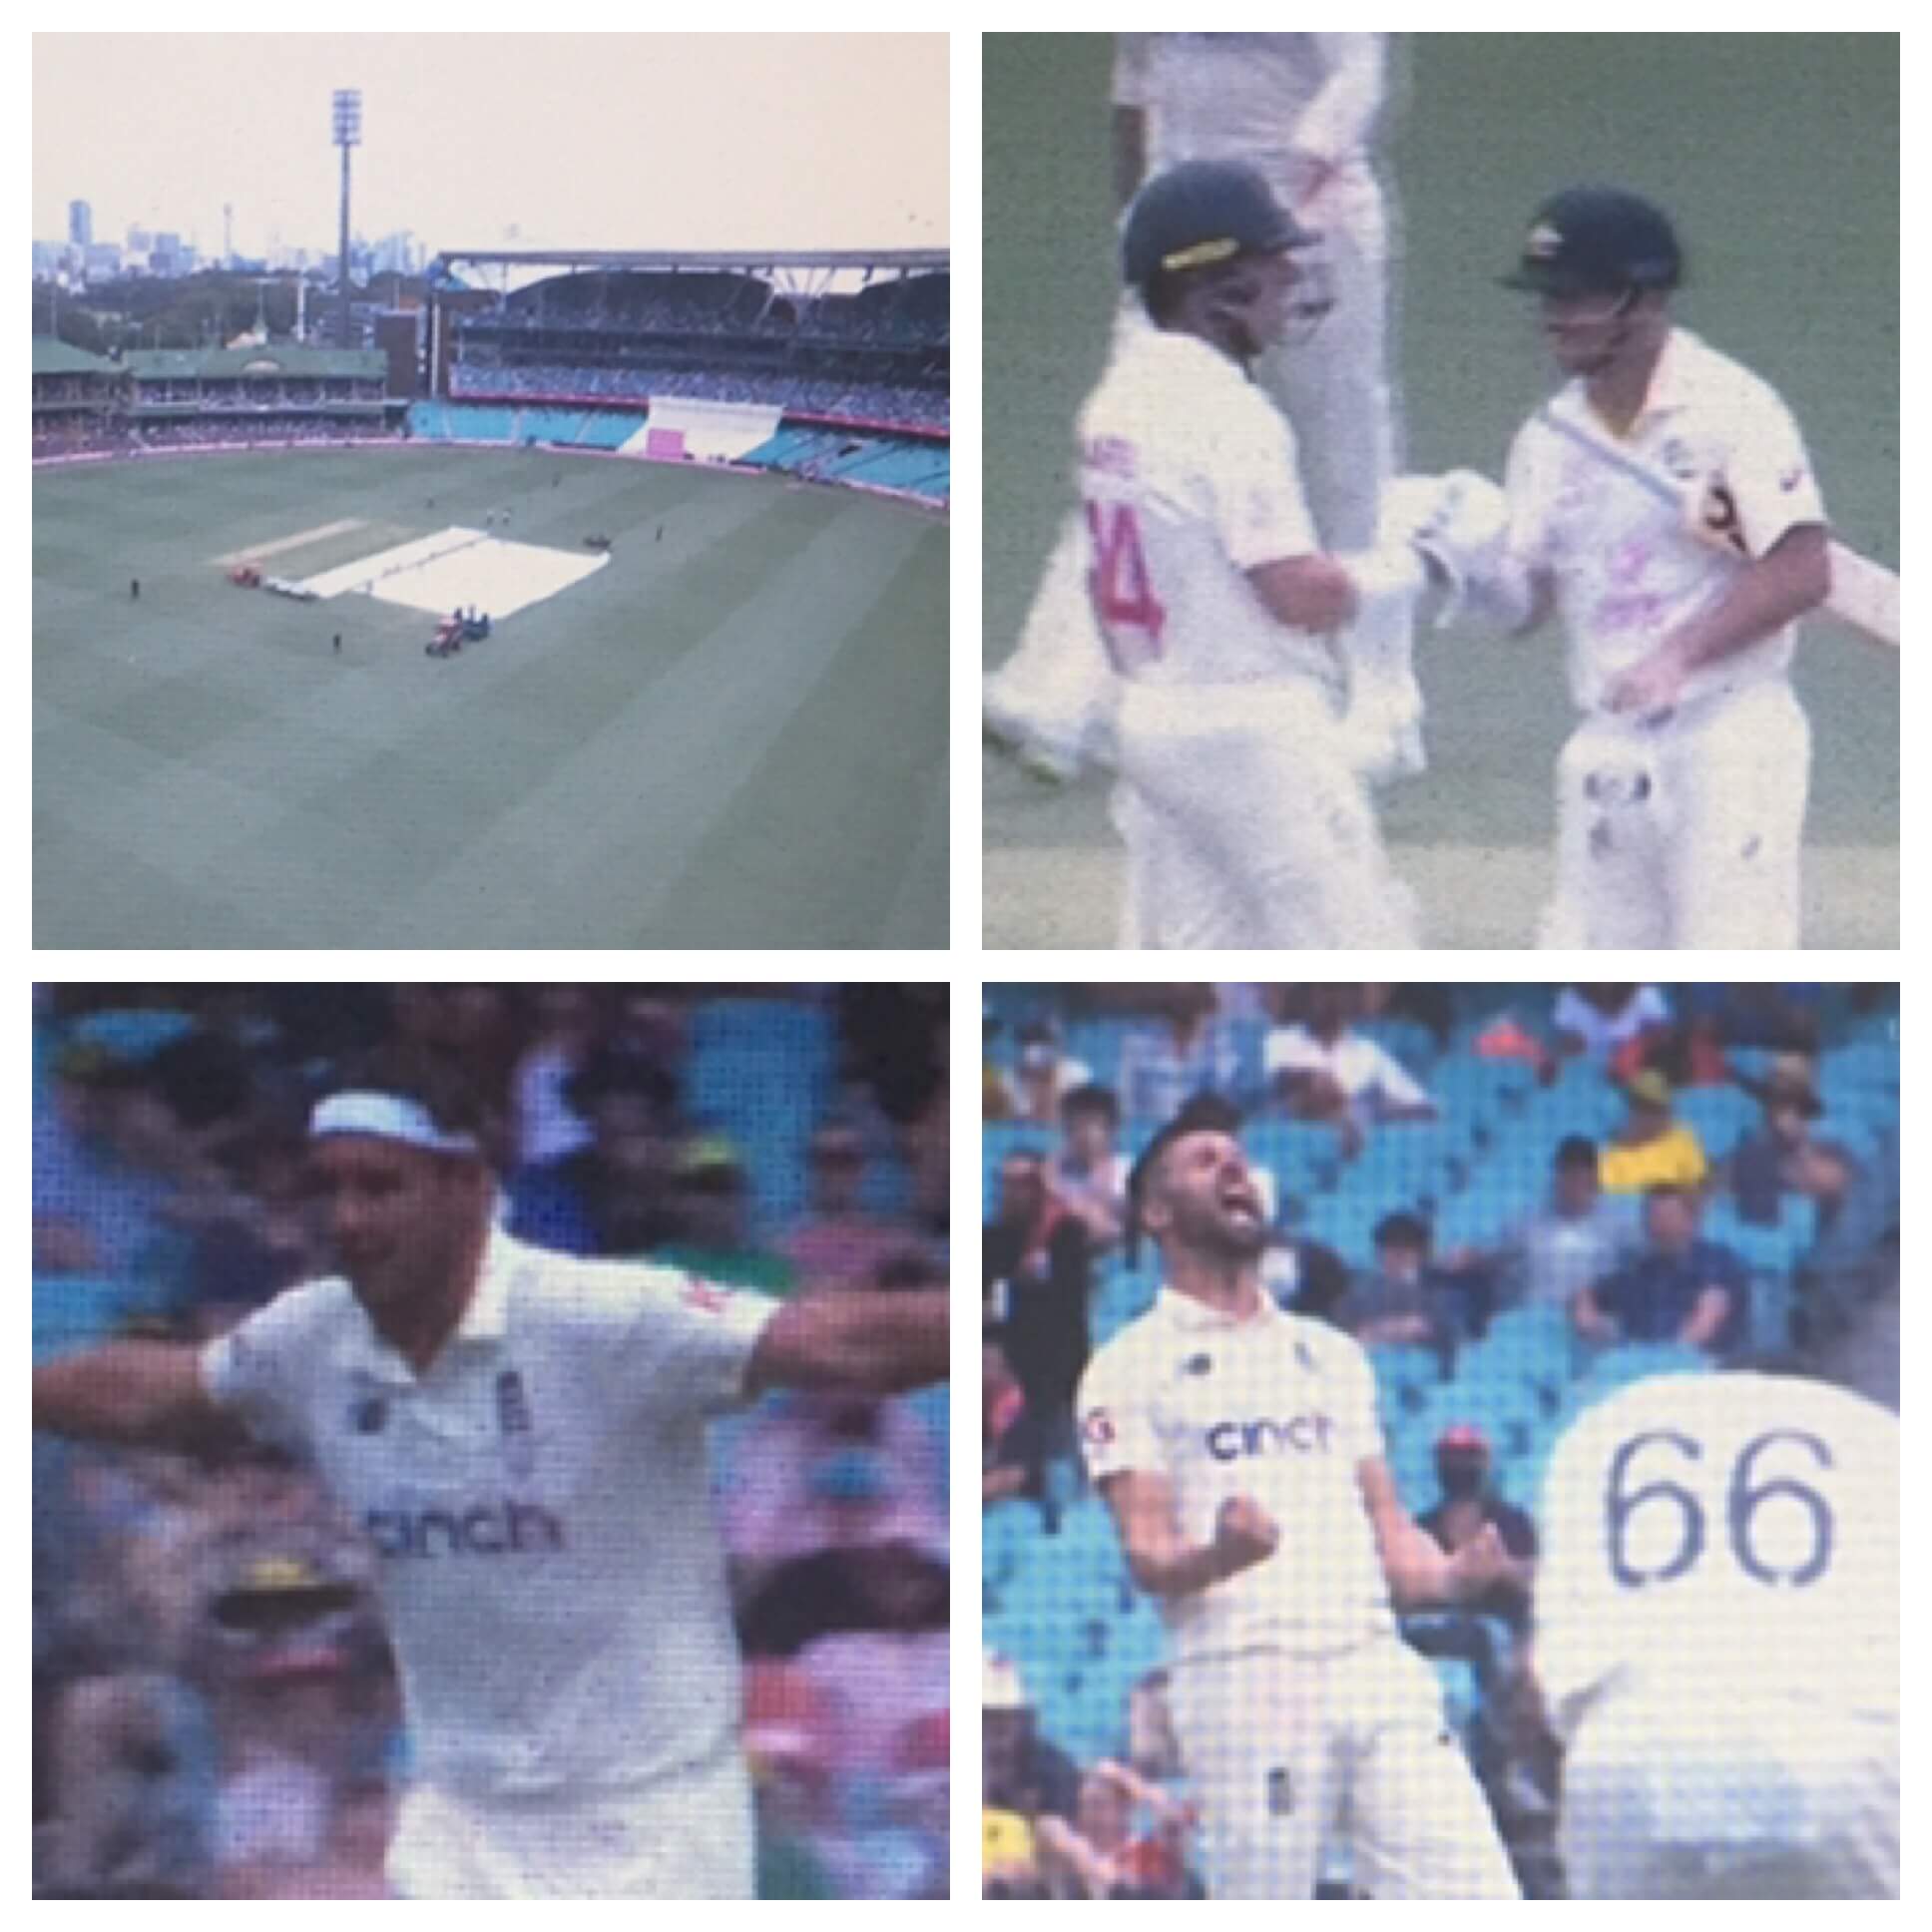 Test Cricket News, Rain halted most of play during Day 1 at the Sydney Cricket Ground but England ahead with three wickets as Australia 126-3